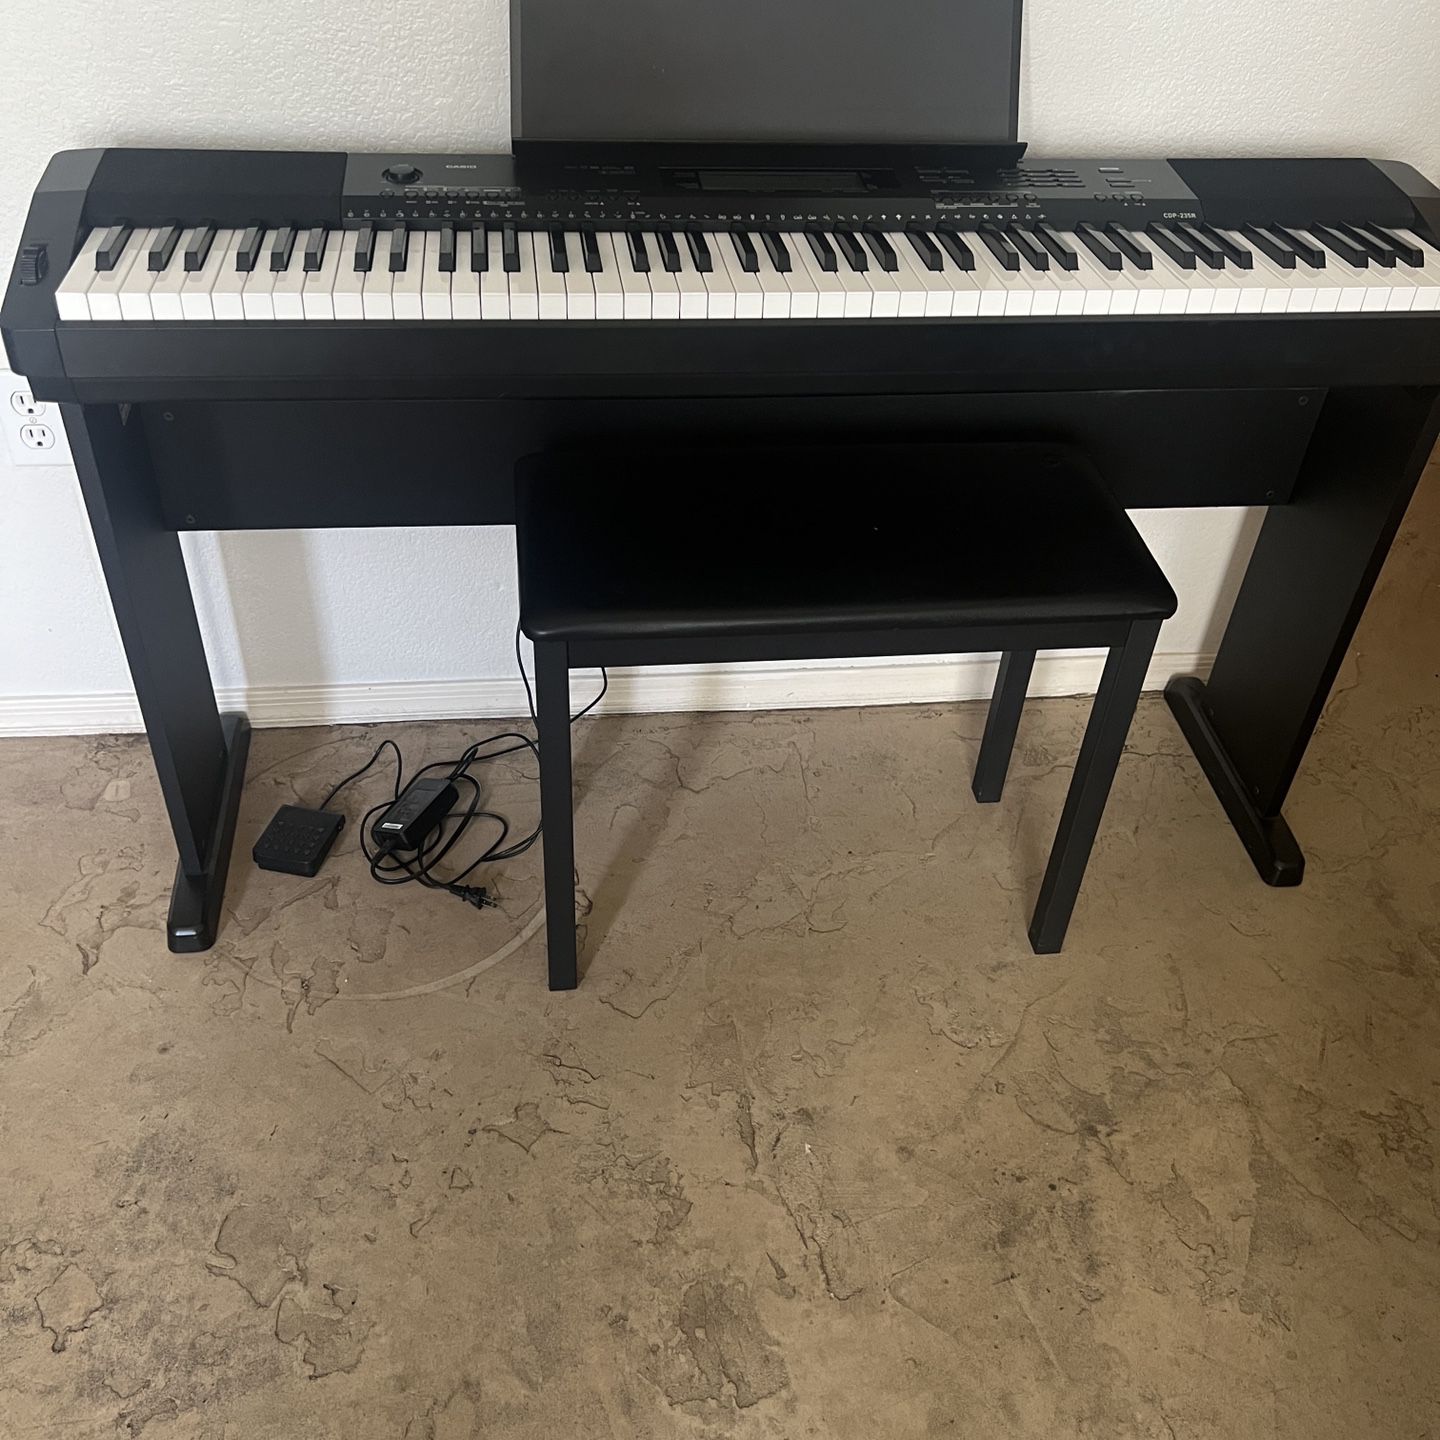 CDP-235R 88 Key Piano- With Sustain Pedal, Wood Stand And Padded Bench for Sale in Scottsdale, AZ - OfferUp